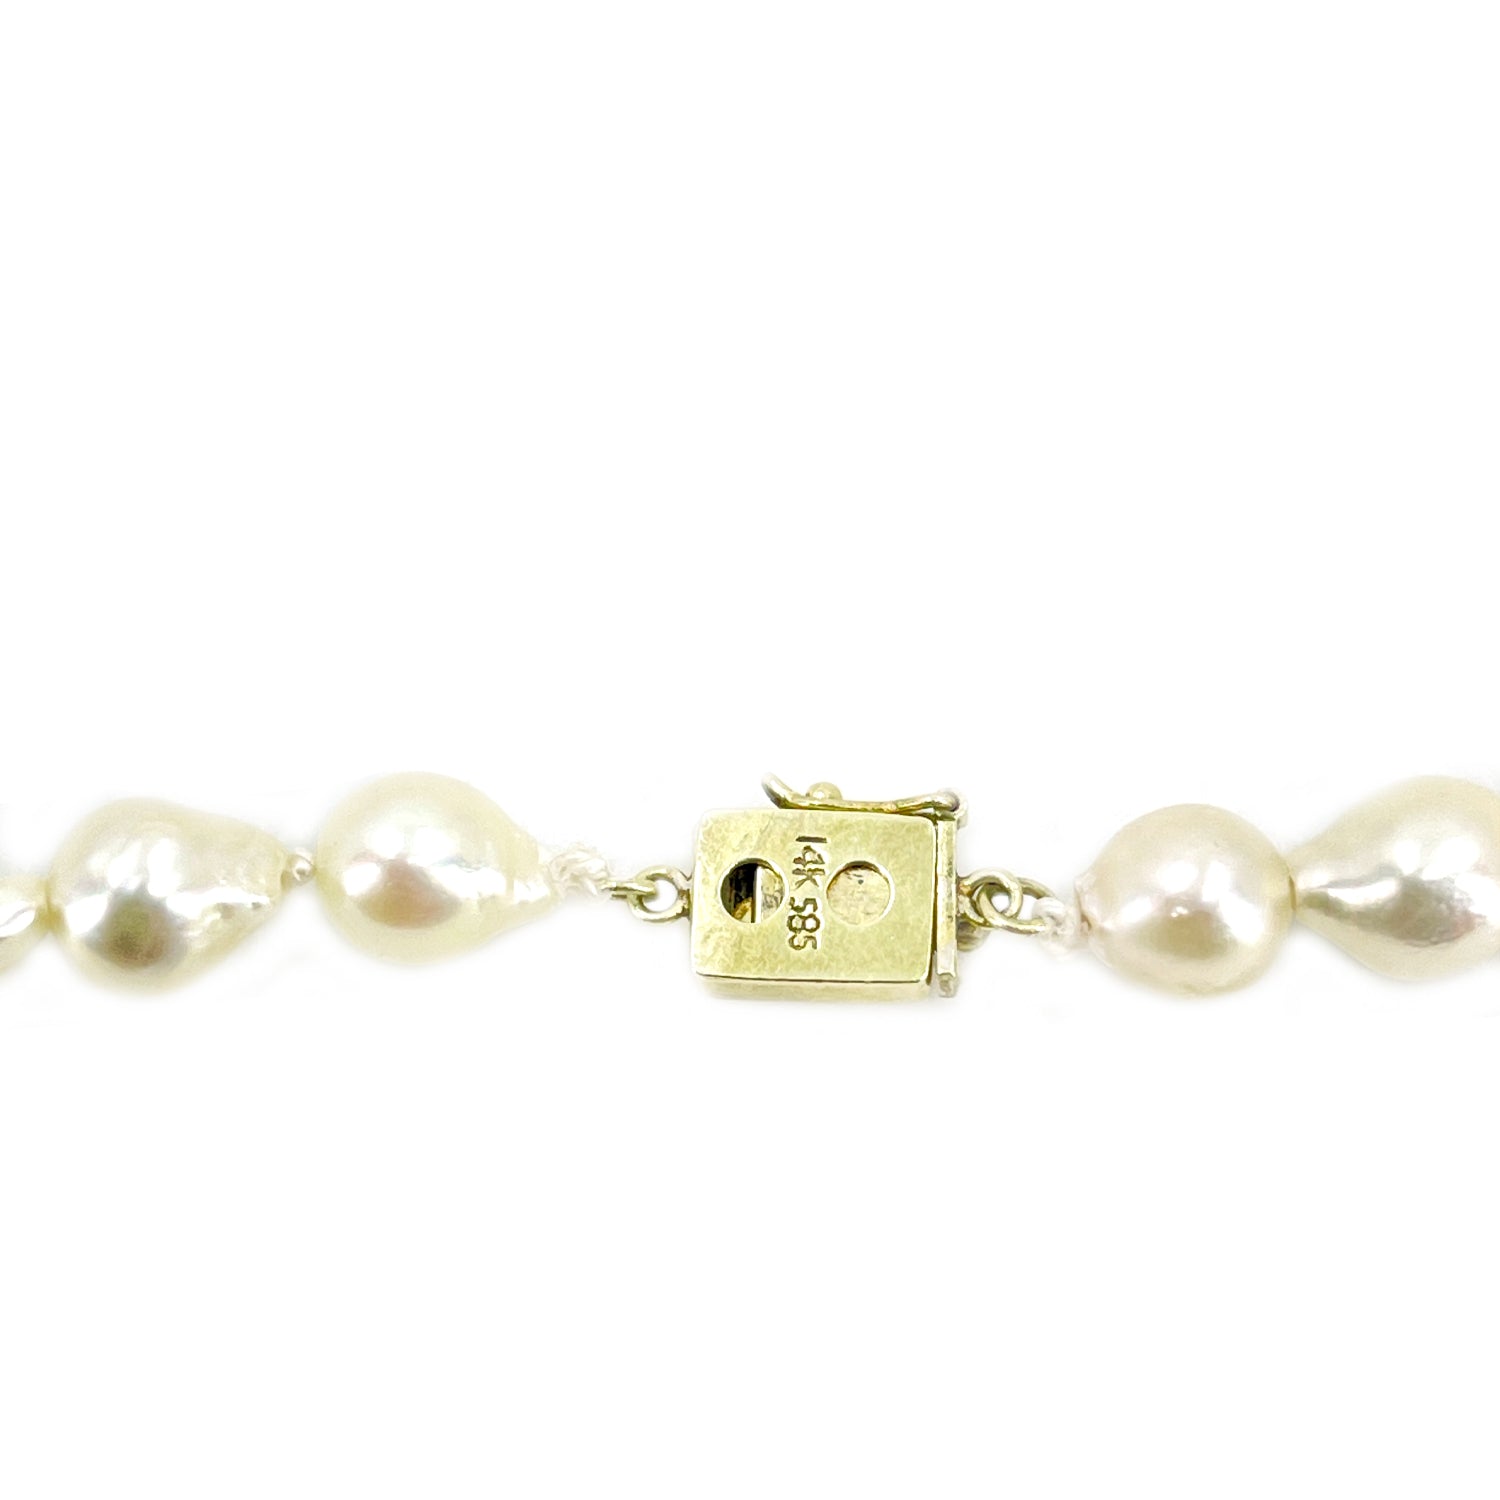 Good Fortune Baroque Japanese Cultured Akoya Pearl Strand - 14K Yellow Gold 31.50 Inch